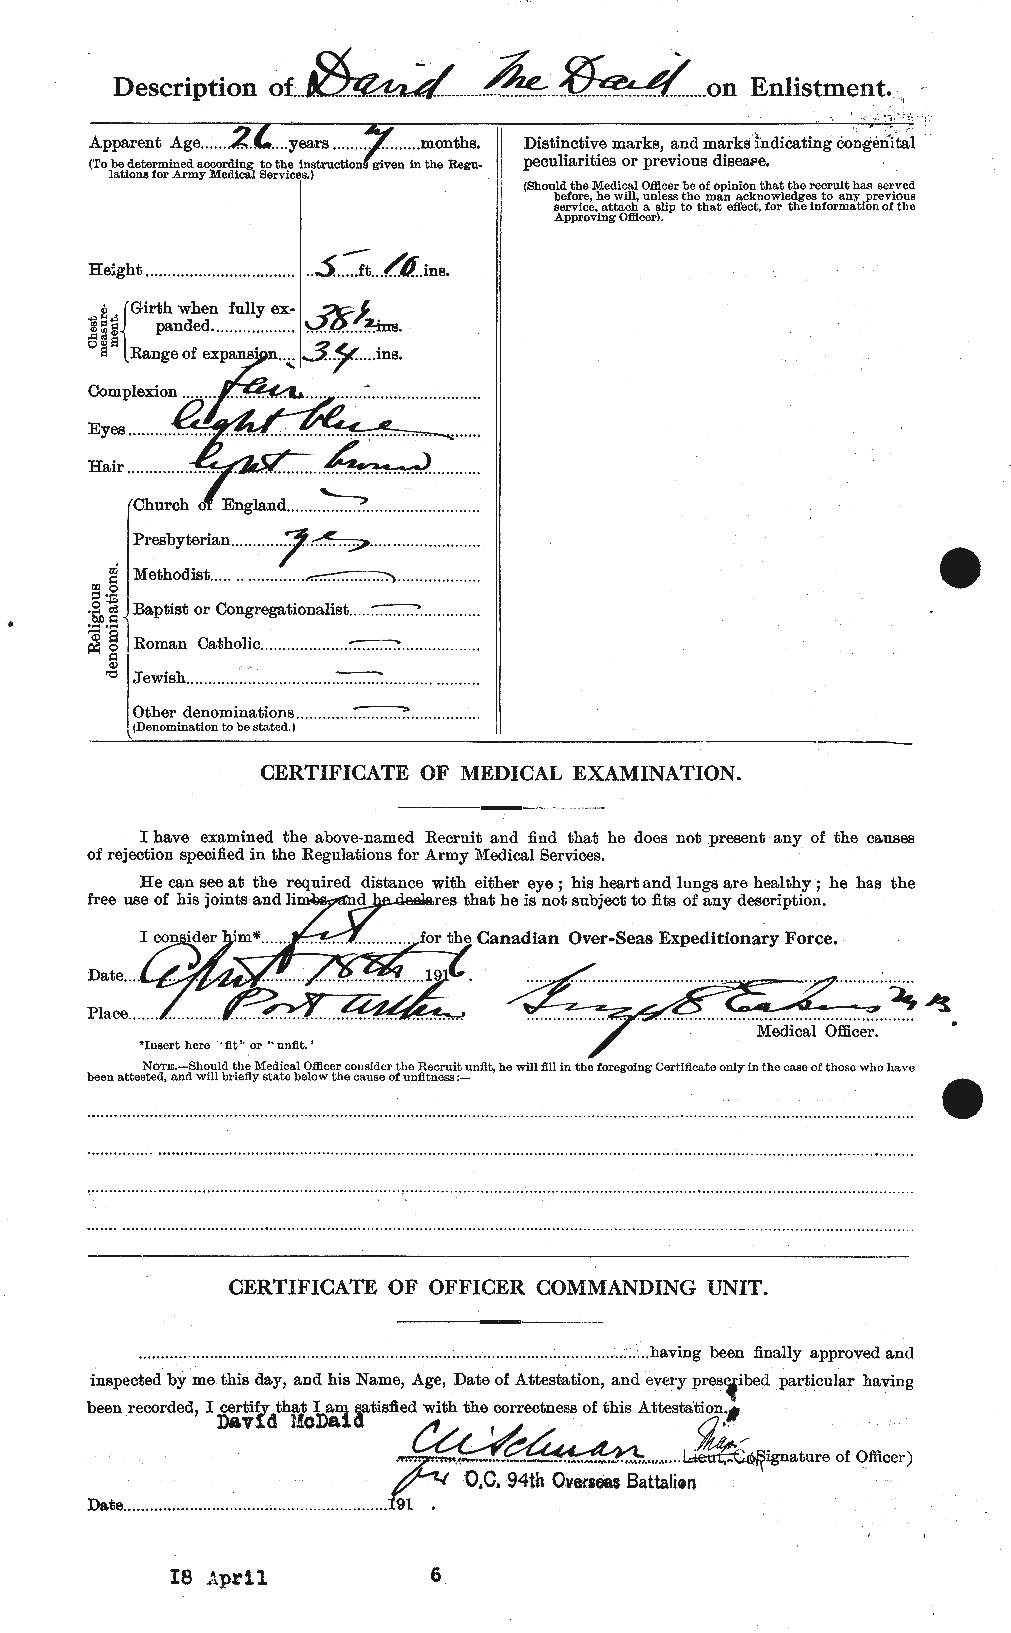 Personnel Records of the First World War - CEF 136229b